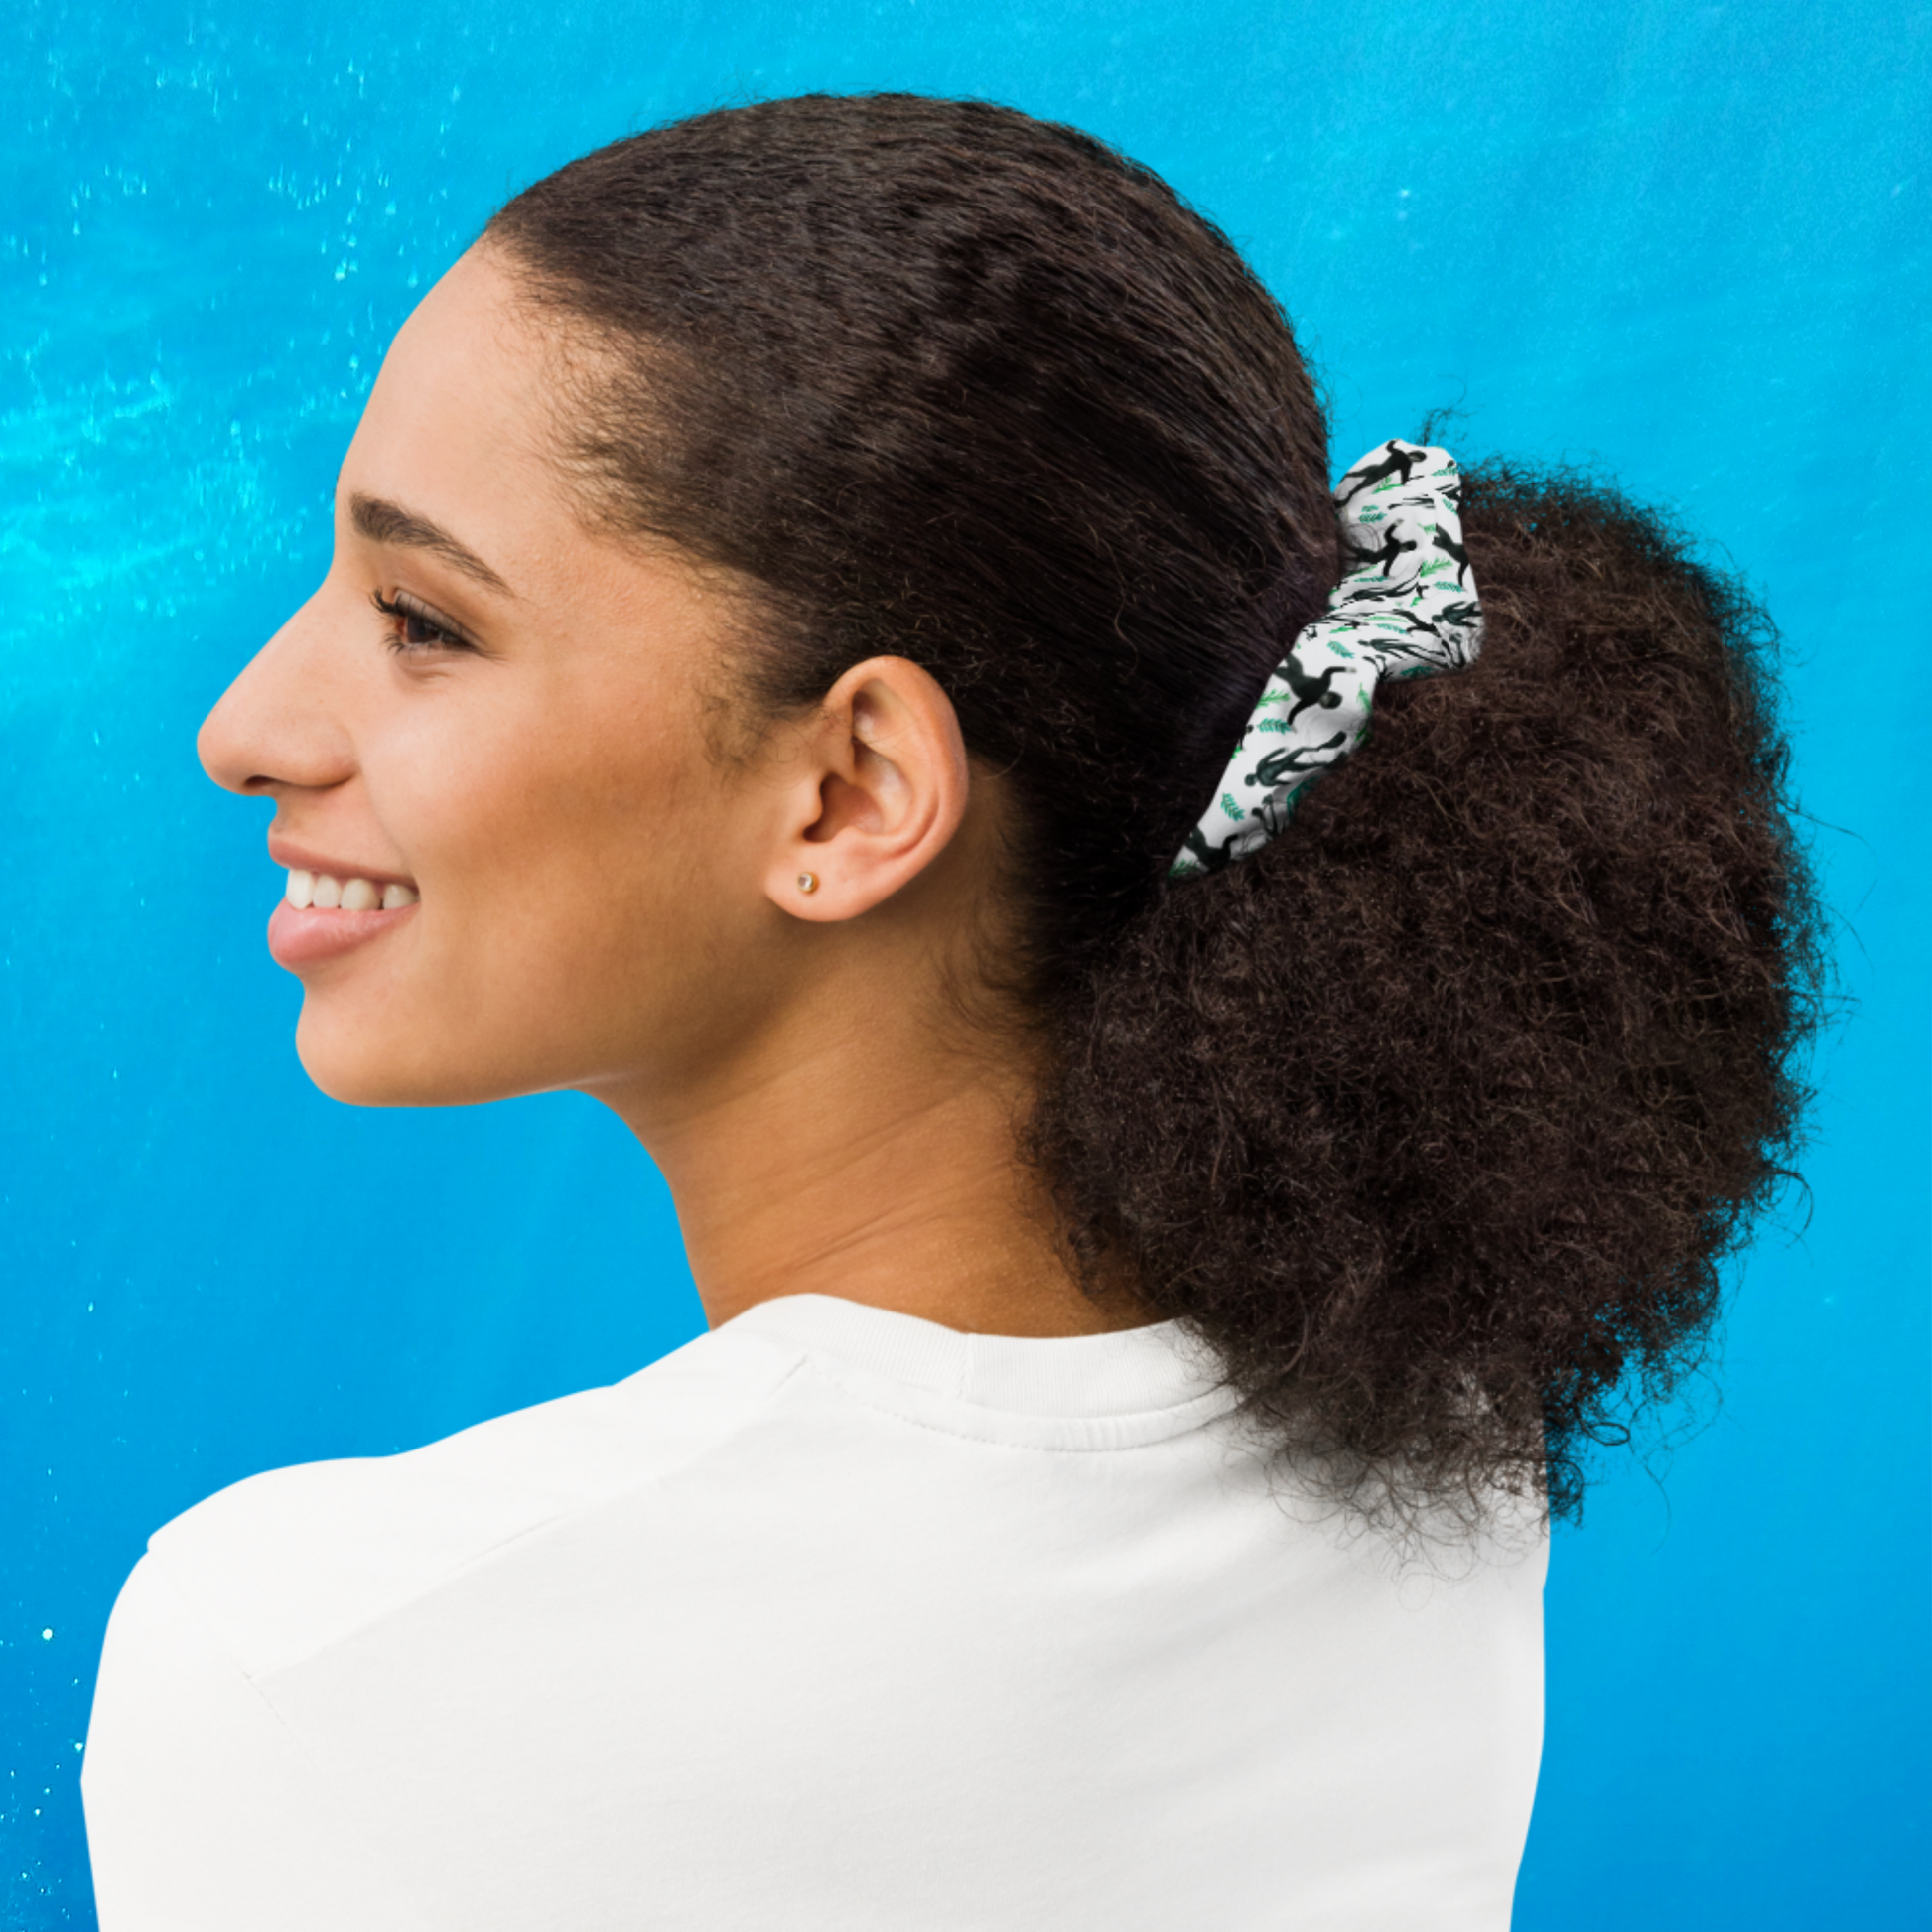 Scuba Diver Scrunchie Hair Tie - Connected Clothing Company - Ethical & Sustainable Apparel - 10% donated to Mission Blue ocean conservation